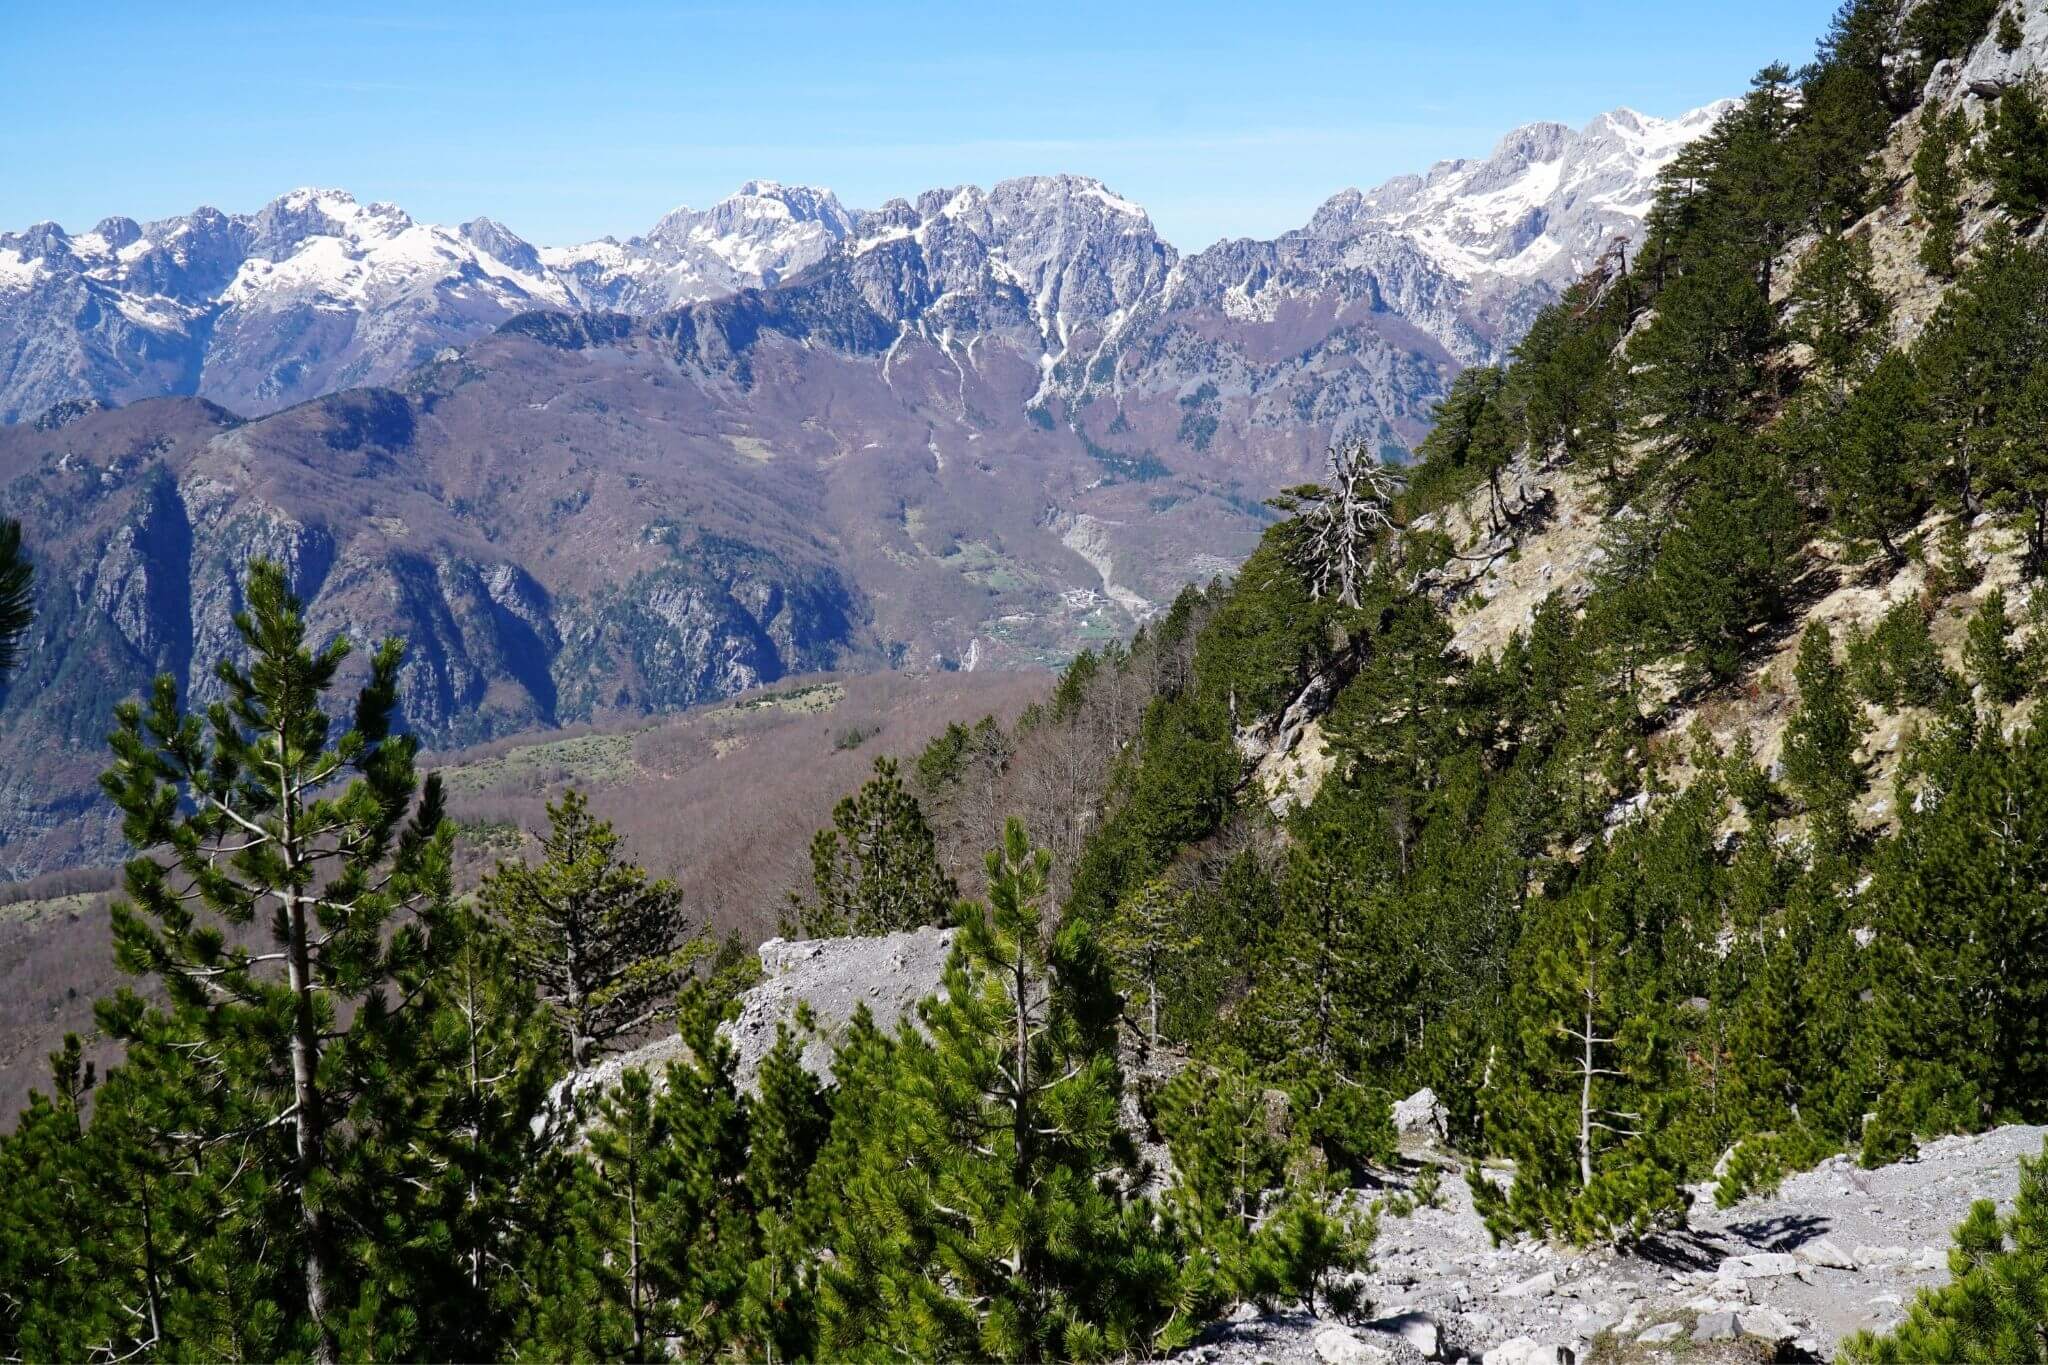 The woodland descent from Valbona to Theth